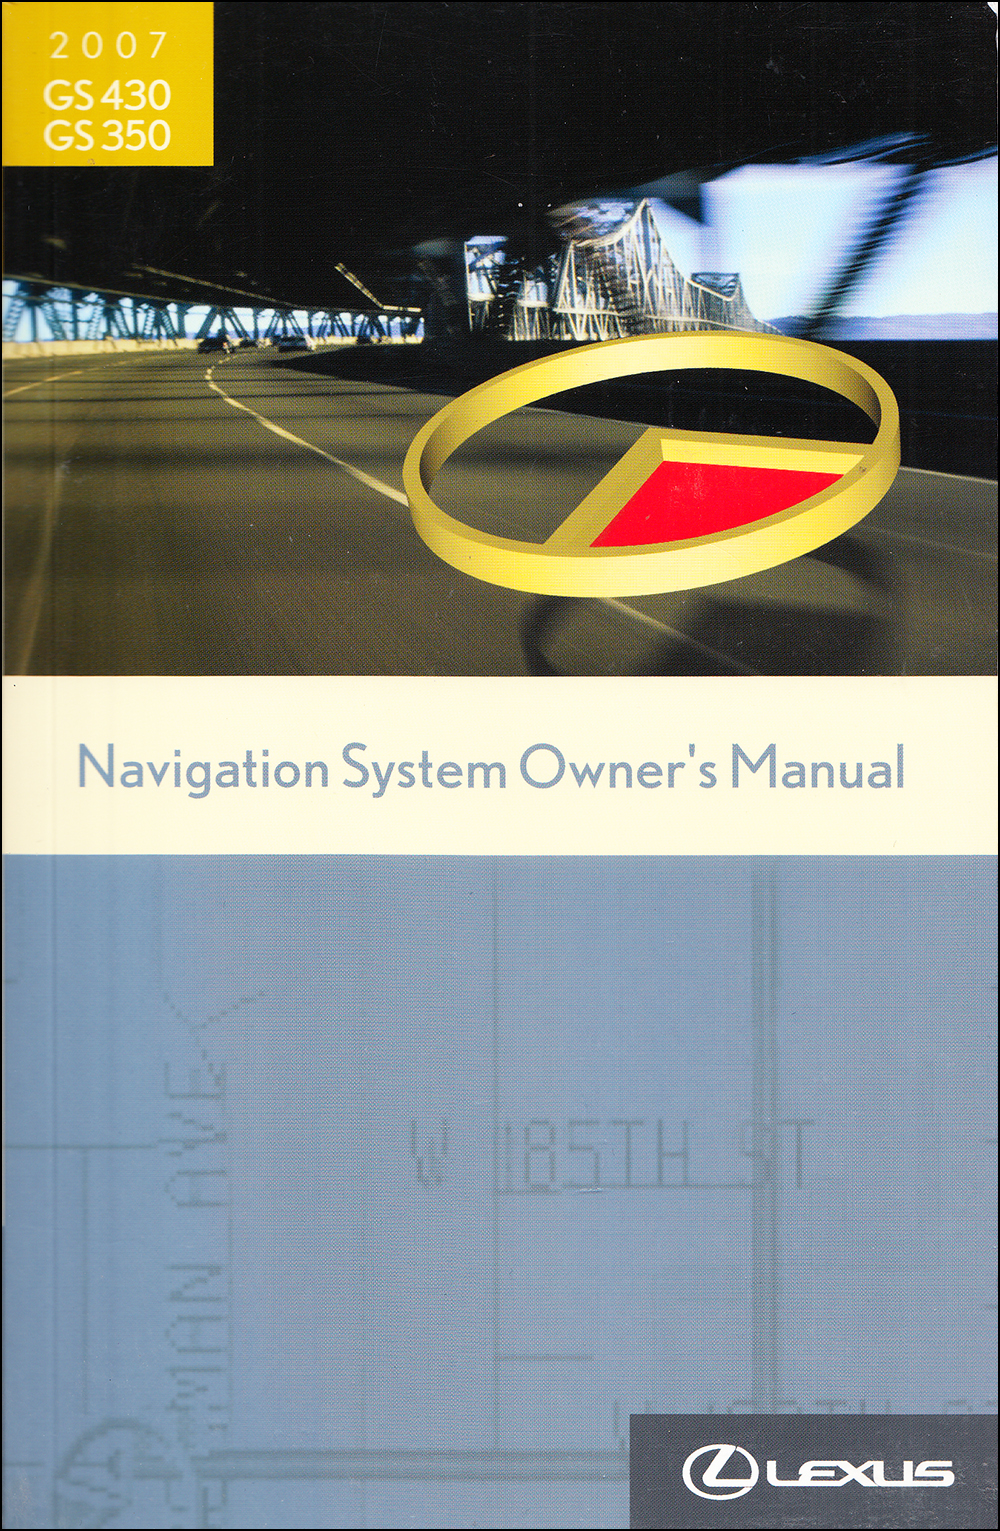 2007 Lexus GS 350 and GS 430 Navigation System Owner's Manual Original